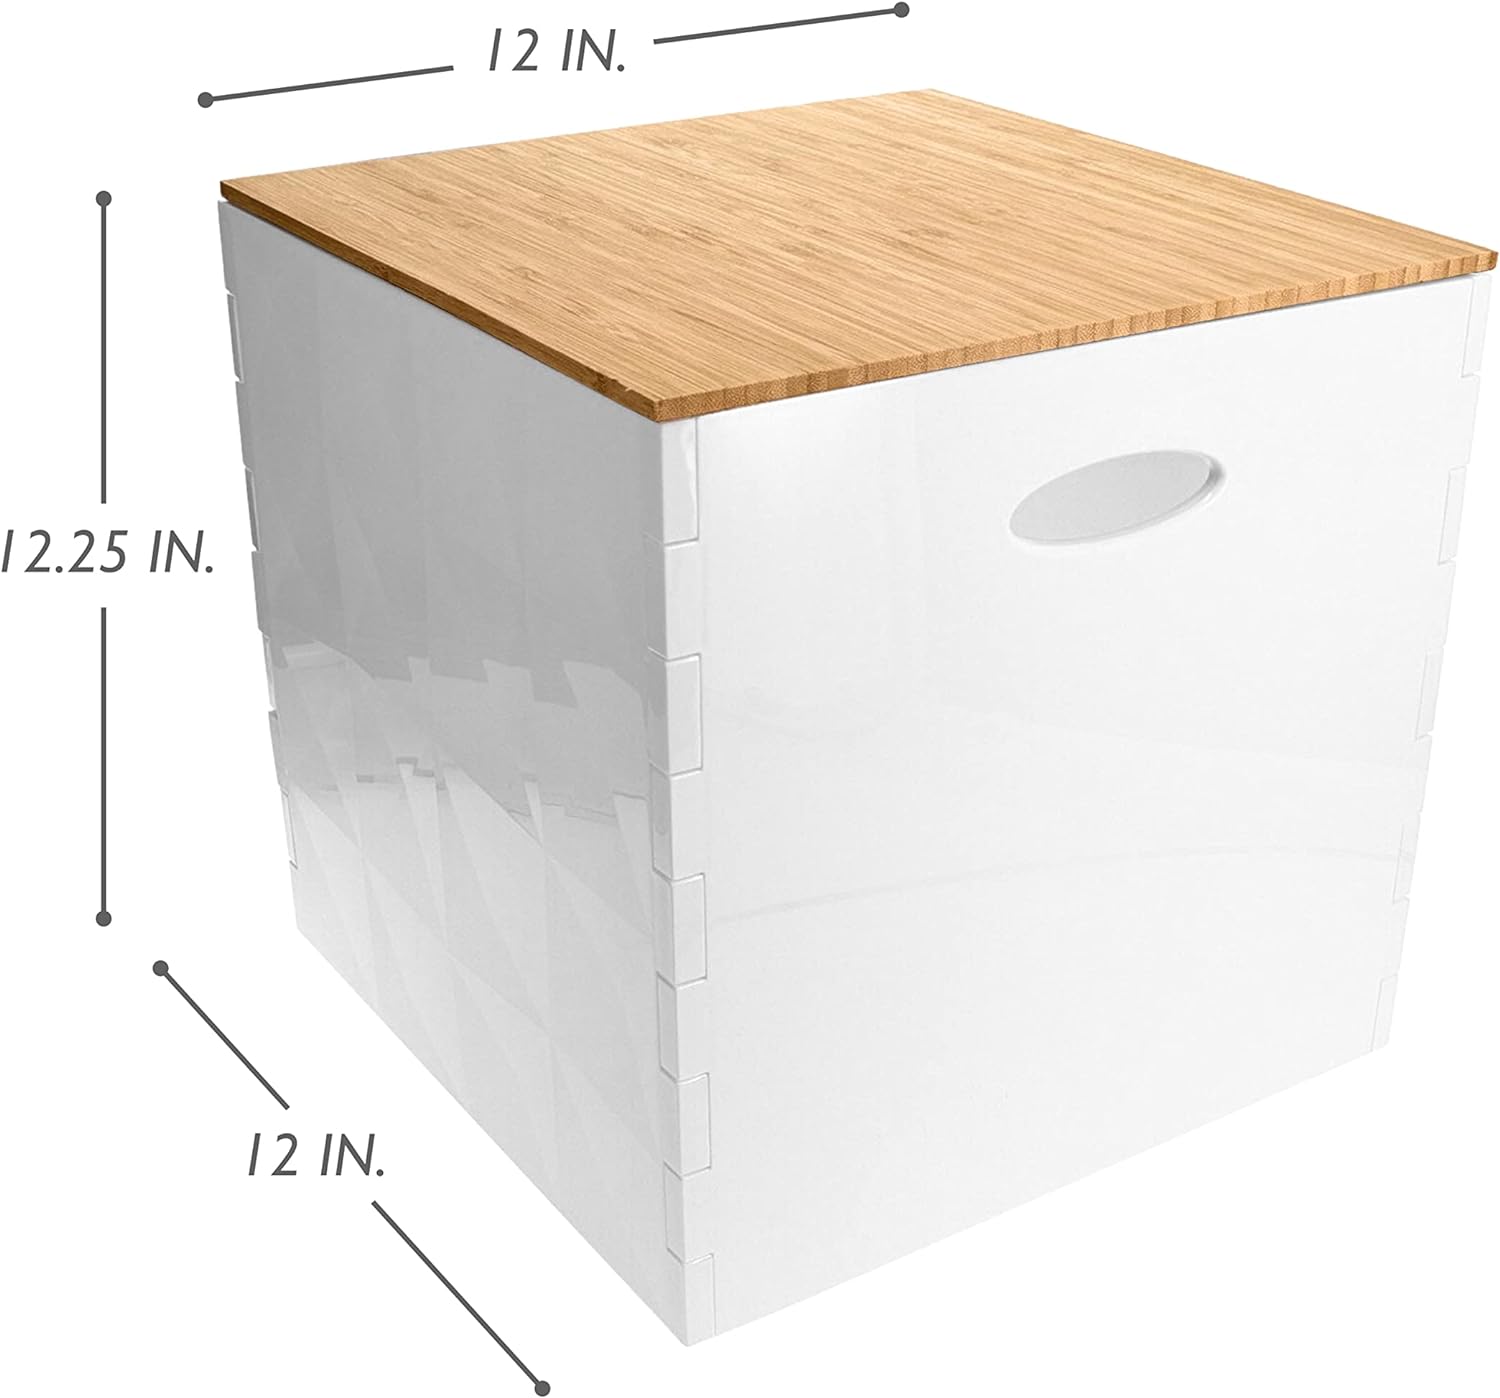 Home+Solutions Plastic and Bamboo White Large Crystal Bin - Multipurpose Storage Container (81534) Large White